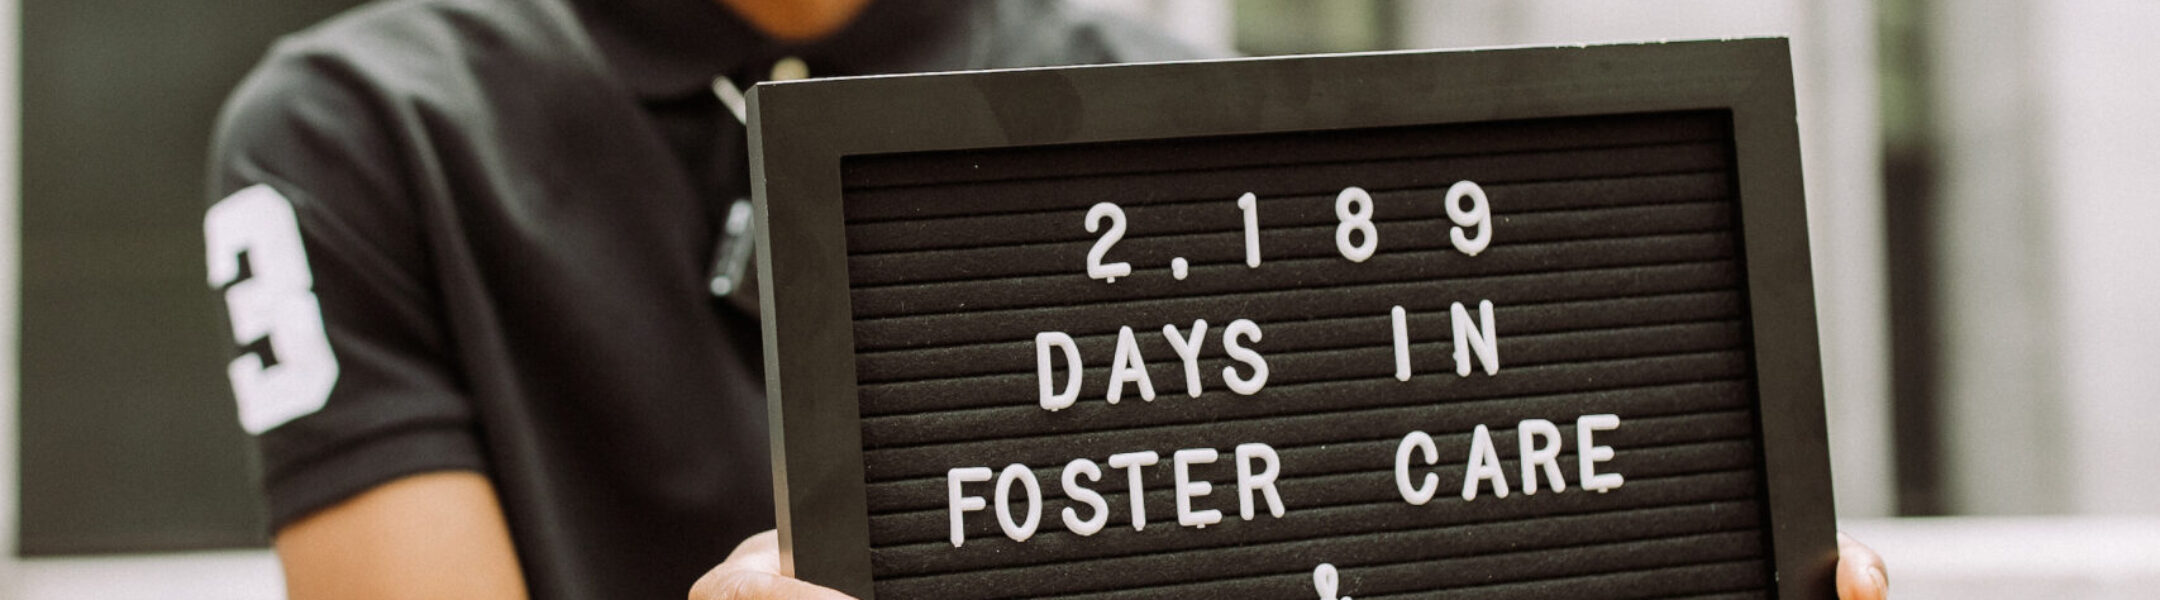 Darian holding sign 2189 days in foster care